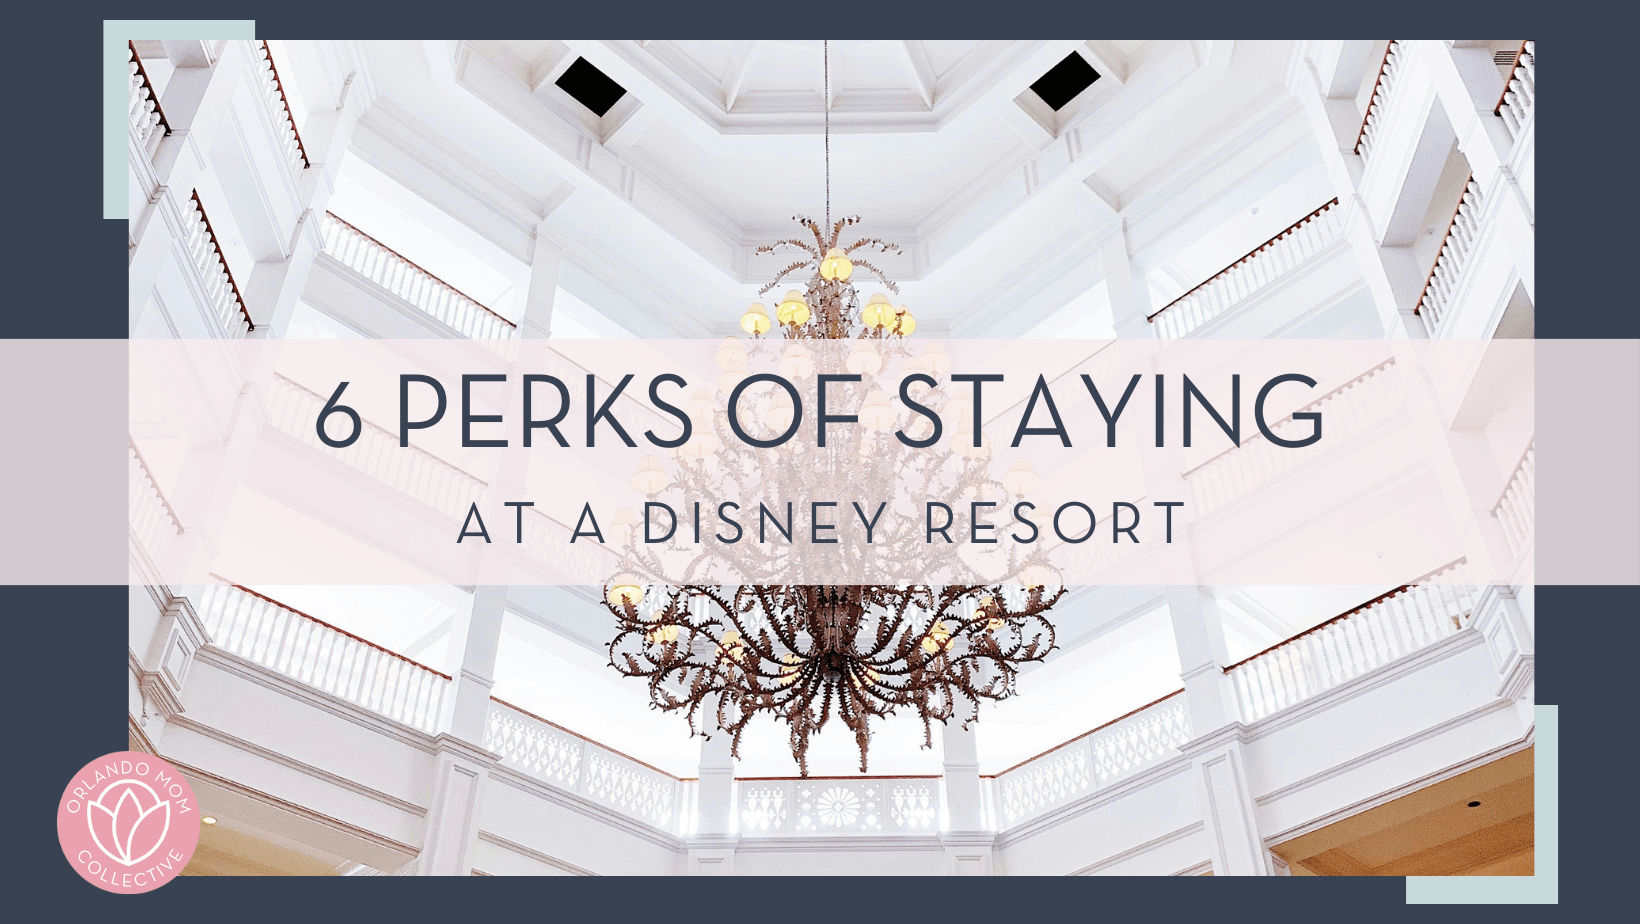 Dennis Cortes via unsplash photo of a big chandelier and ceiling of the Grand Floridian Resort with text '6 perks of staying at a Disney Resort' in front of picture